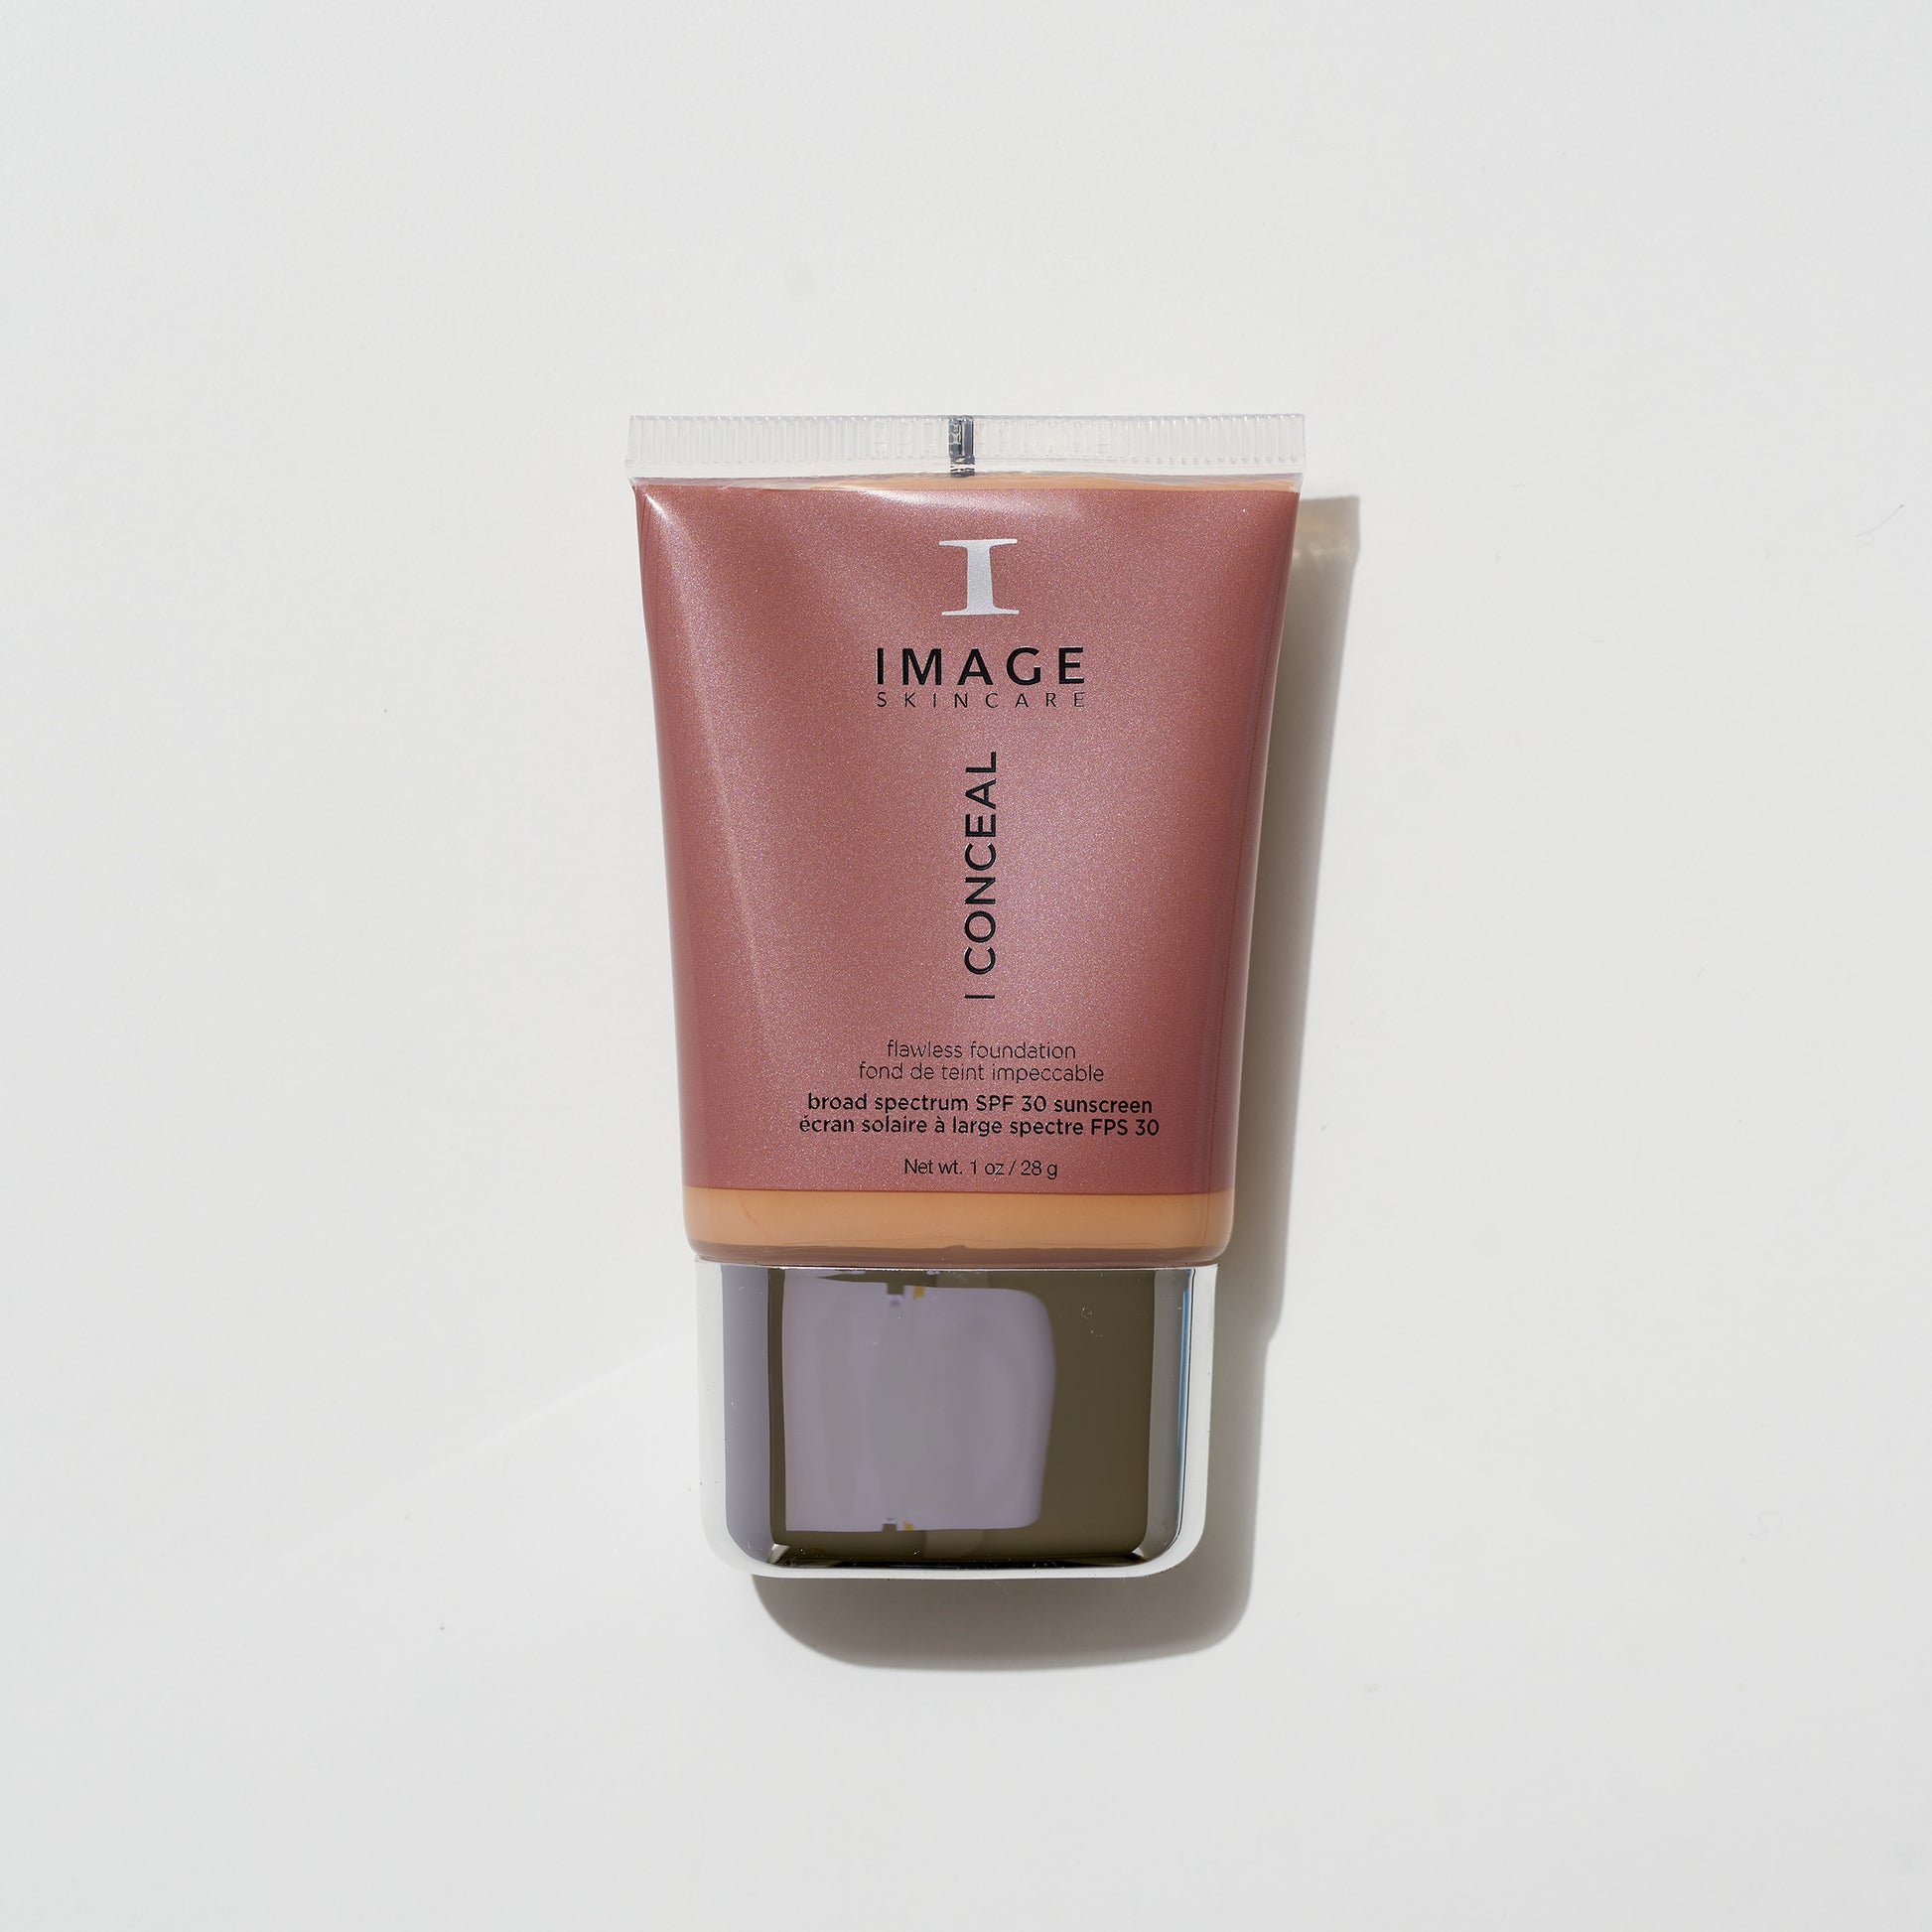 I CONCEAL flawless foundation broad-spectrum SPF 30 sunscreen beige, Image Skincare